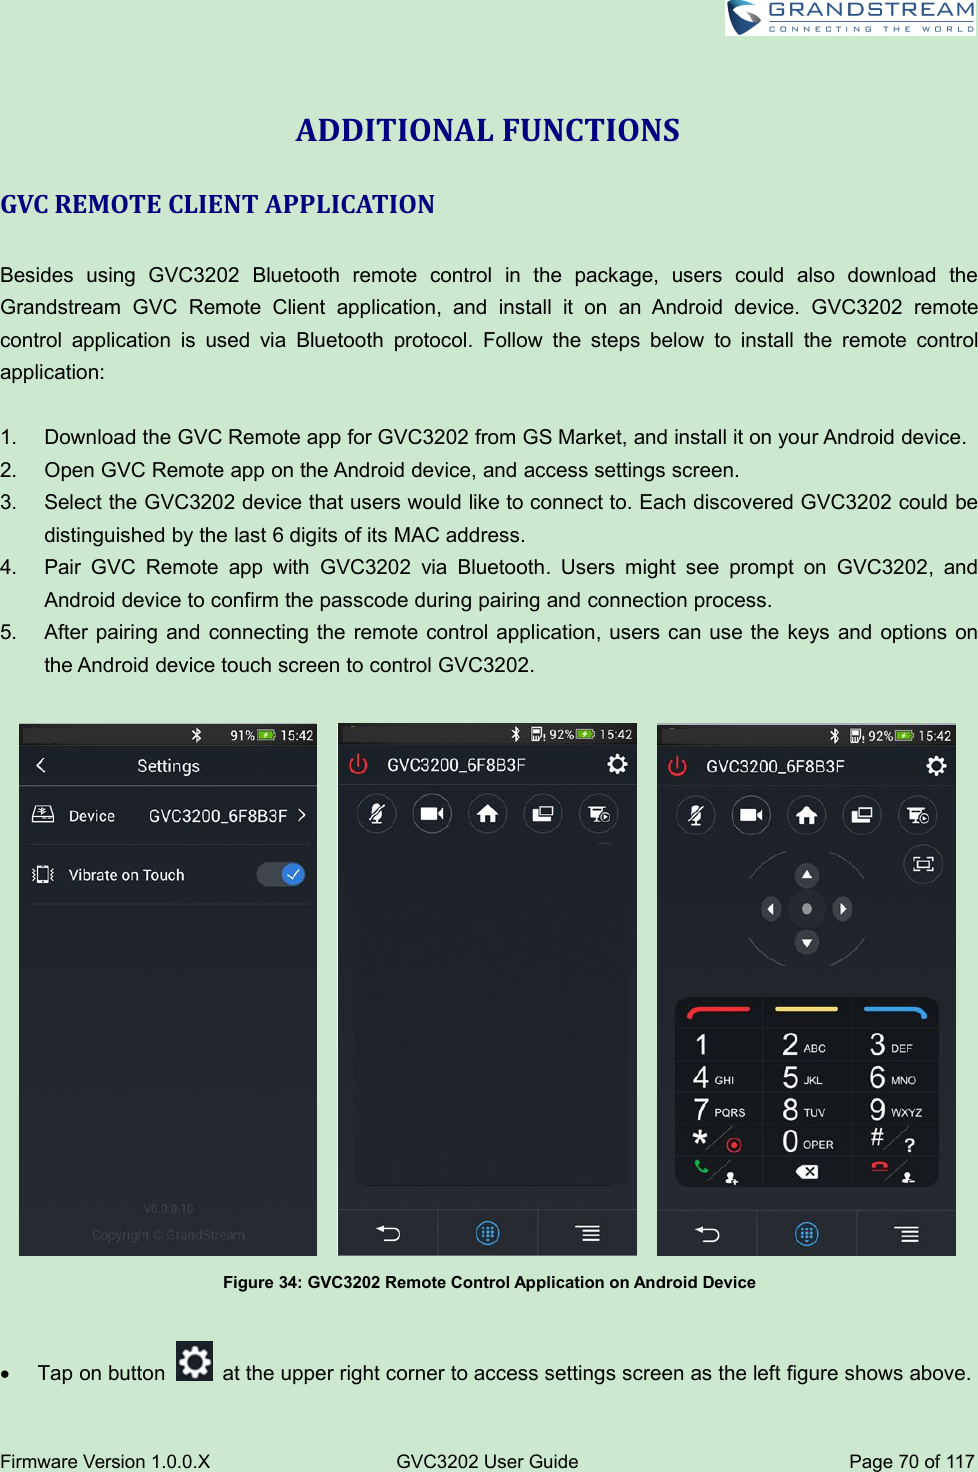 Firmware Version 1.0.0.XGVC3202 User GuidePage 70 of 117ADDITIONAL FUNCTIONSGVC REMOTE CLIENT APPLICATIONBesides using GVC3202 Bluetooth remote control in the package, users could also download theGrandstream GVC Remote Client application, and install it on an Android device. GVC3202 remotecontrol application is used via Bluetooth protocol. Follow the steps below to install the remote controlapplication:1. Download the GVC Remote app for GVC3202 from GS Market, and install it on your Android device.2. Open GVC Remote app on the Android device, and access settings screen.3. Select the GVC3202 device that users would like to connect to. Each discovered GVC3202 could bedistinguished by the last 6 digits of its MAC address.4. Pair GVC Remote app with GVC3202 via Bluetooth. Users might see prompt on GVC3202, andAndroid device to confirm the passcode during pairing and connection process.5. After pairing and connecting the remote control application, users can use the keys and options onthe Android device touch screen to control GVC3202.Figure 34: GVC3202 Remote Control Application on Android DeviceTap on button at the upper right corner to access settings screen as the left figure shows above.